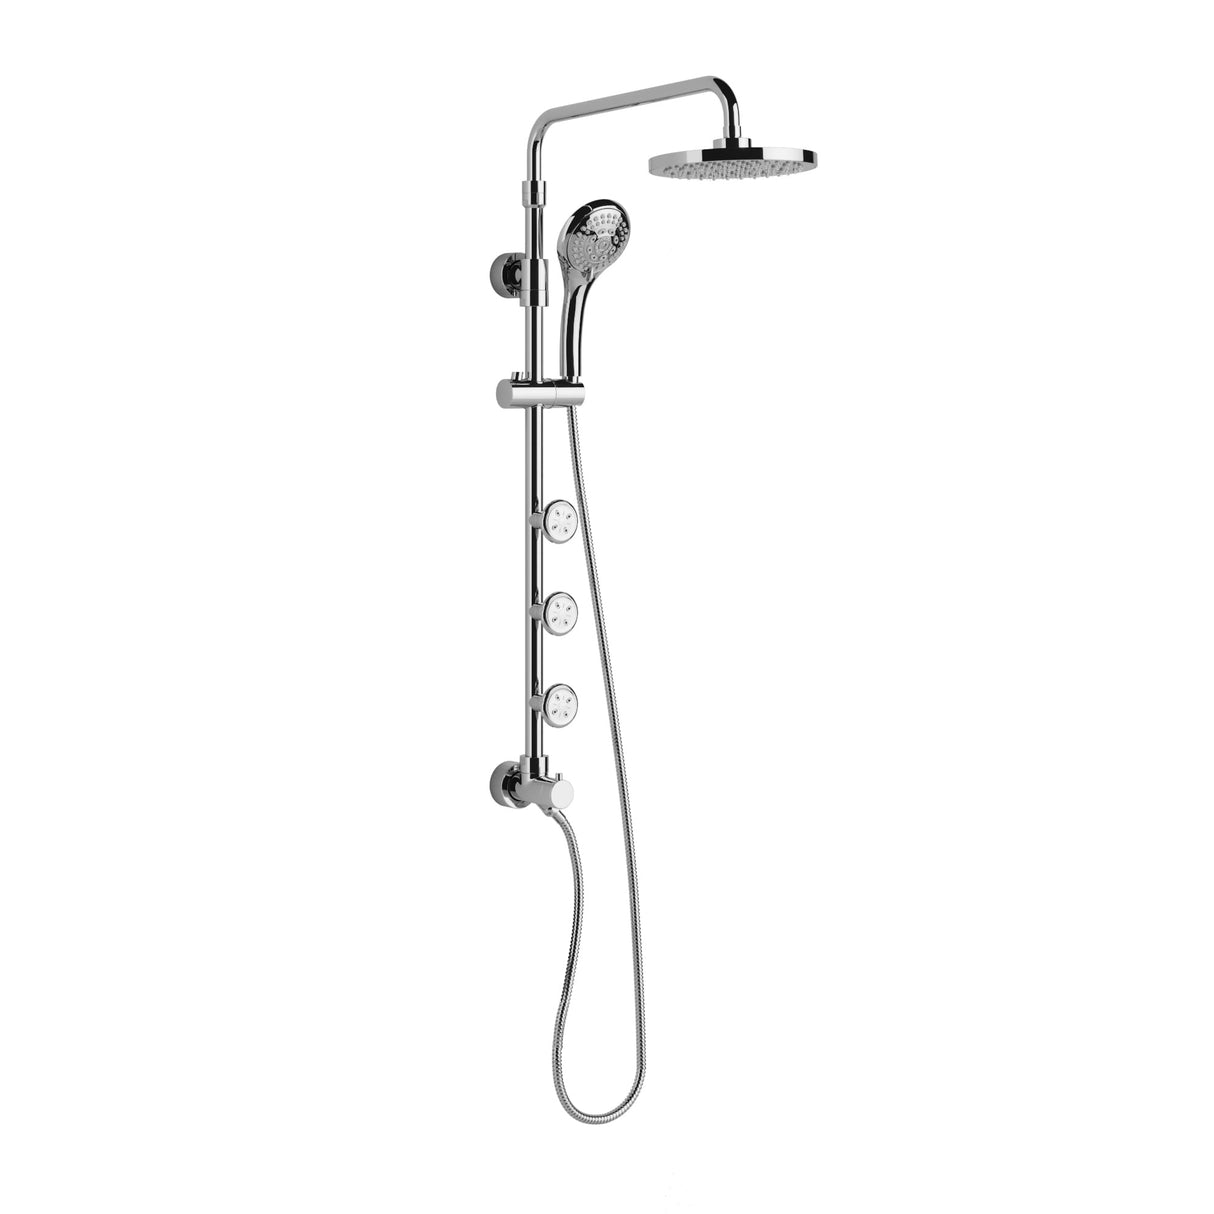 PULSE ShowerSpas 1028-CH Lanikai Shower System with 8" Rain Showerhead, 3 Dual-Function Body Spray Jets, 5-Function Hand Shower, Polished Chrome, 2.5 GPM